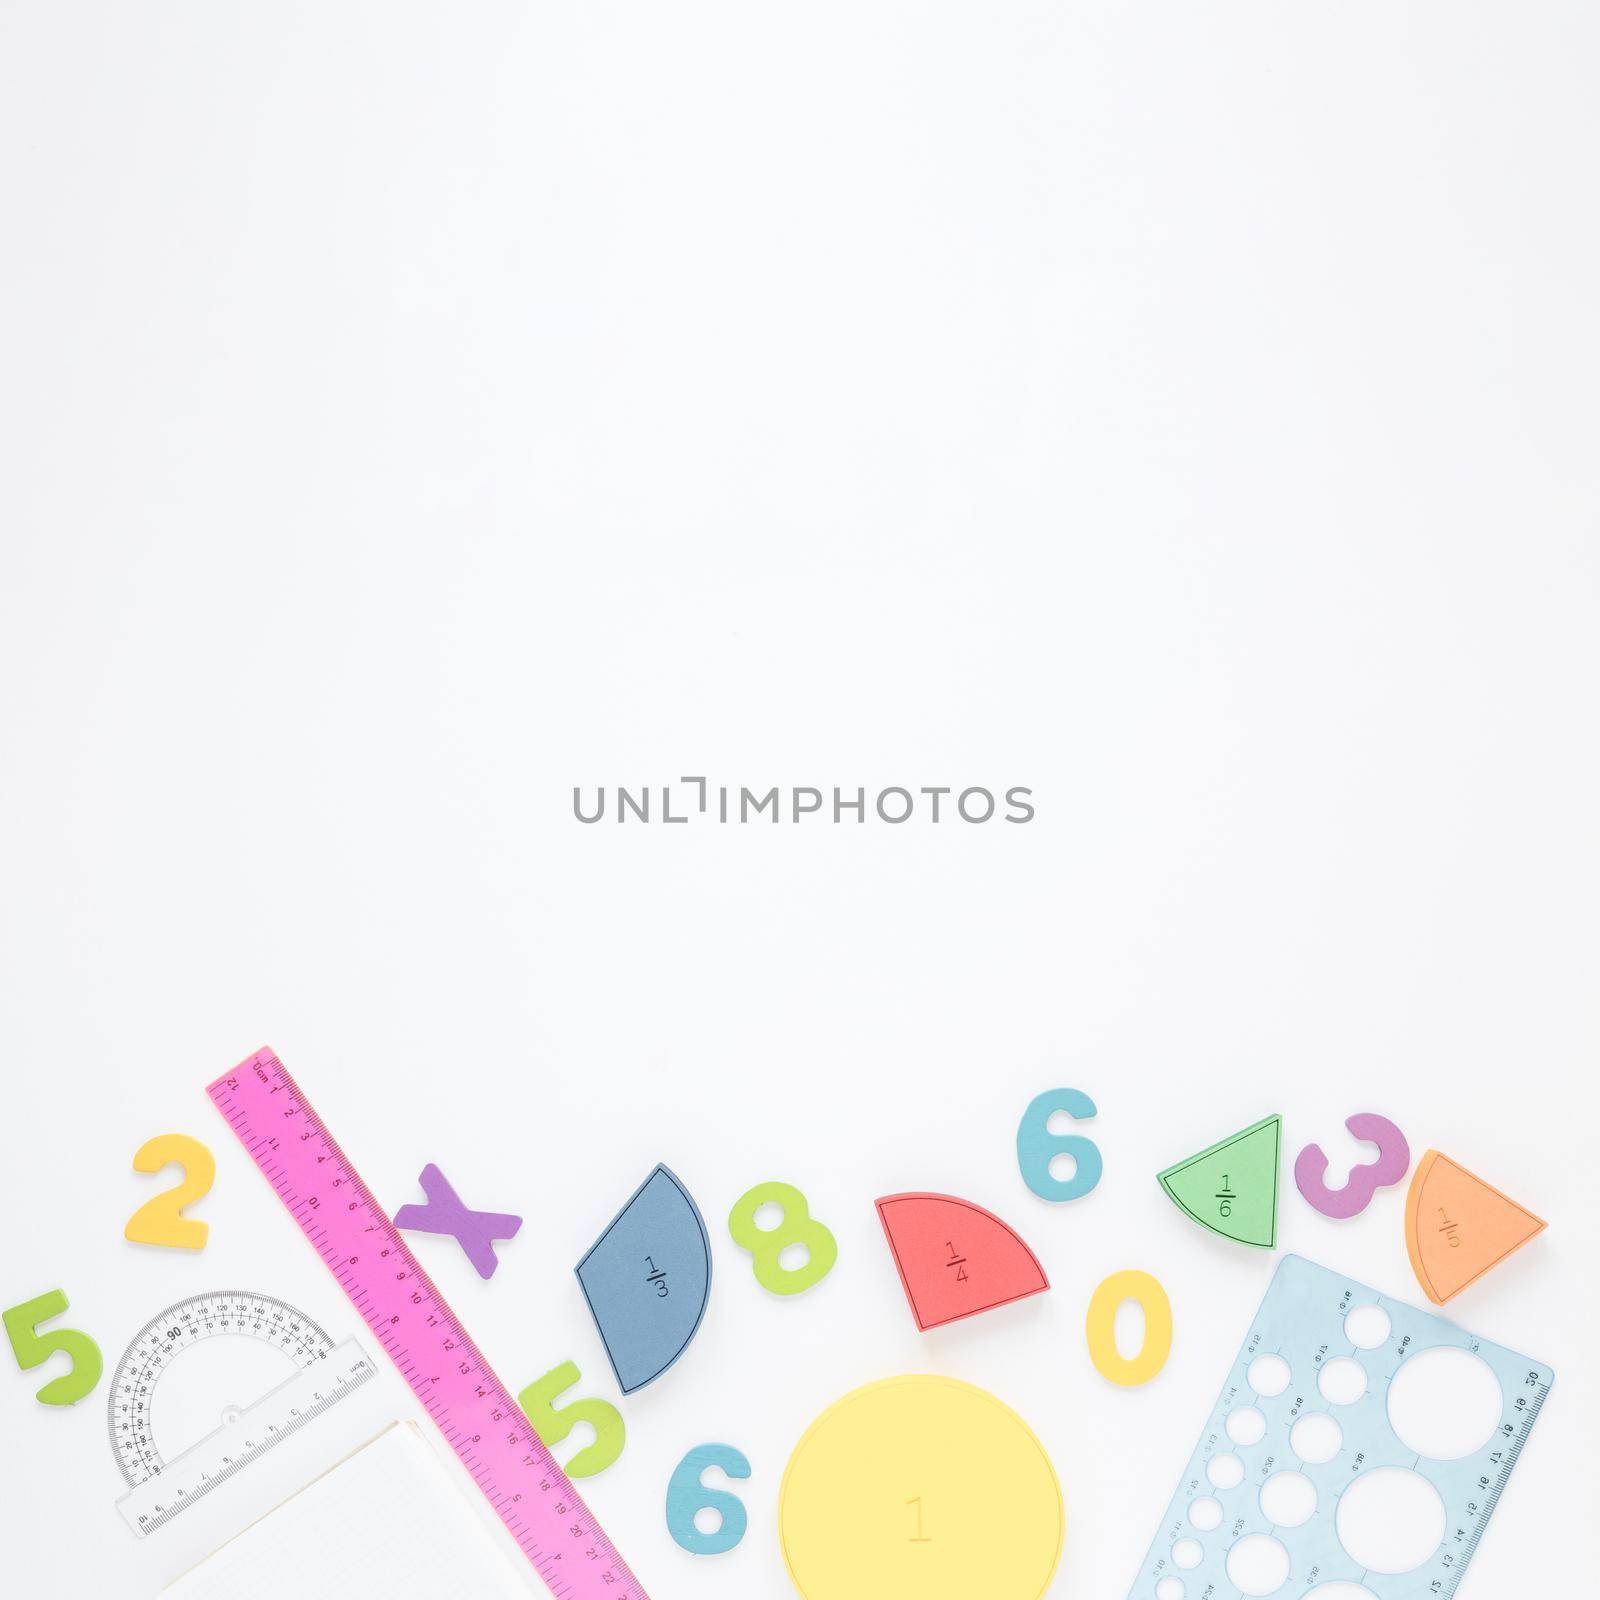 colourful numbers stationery white copy space background by Zahard